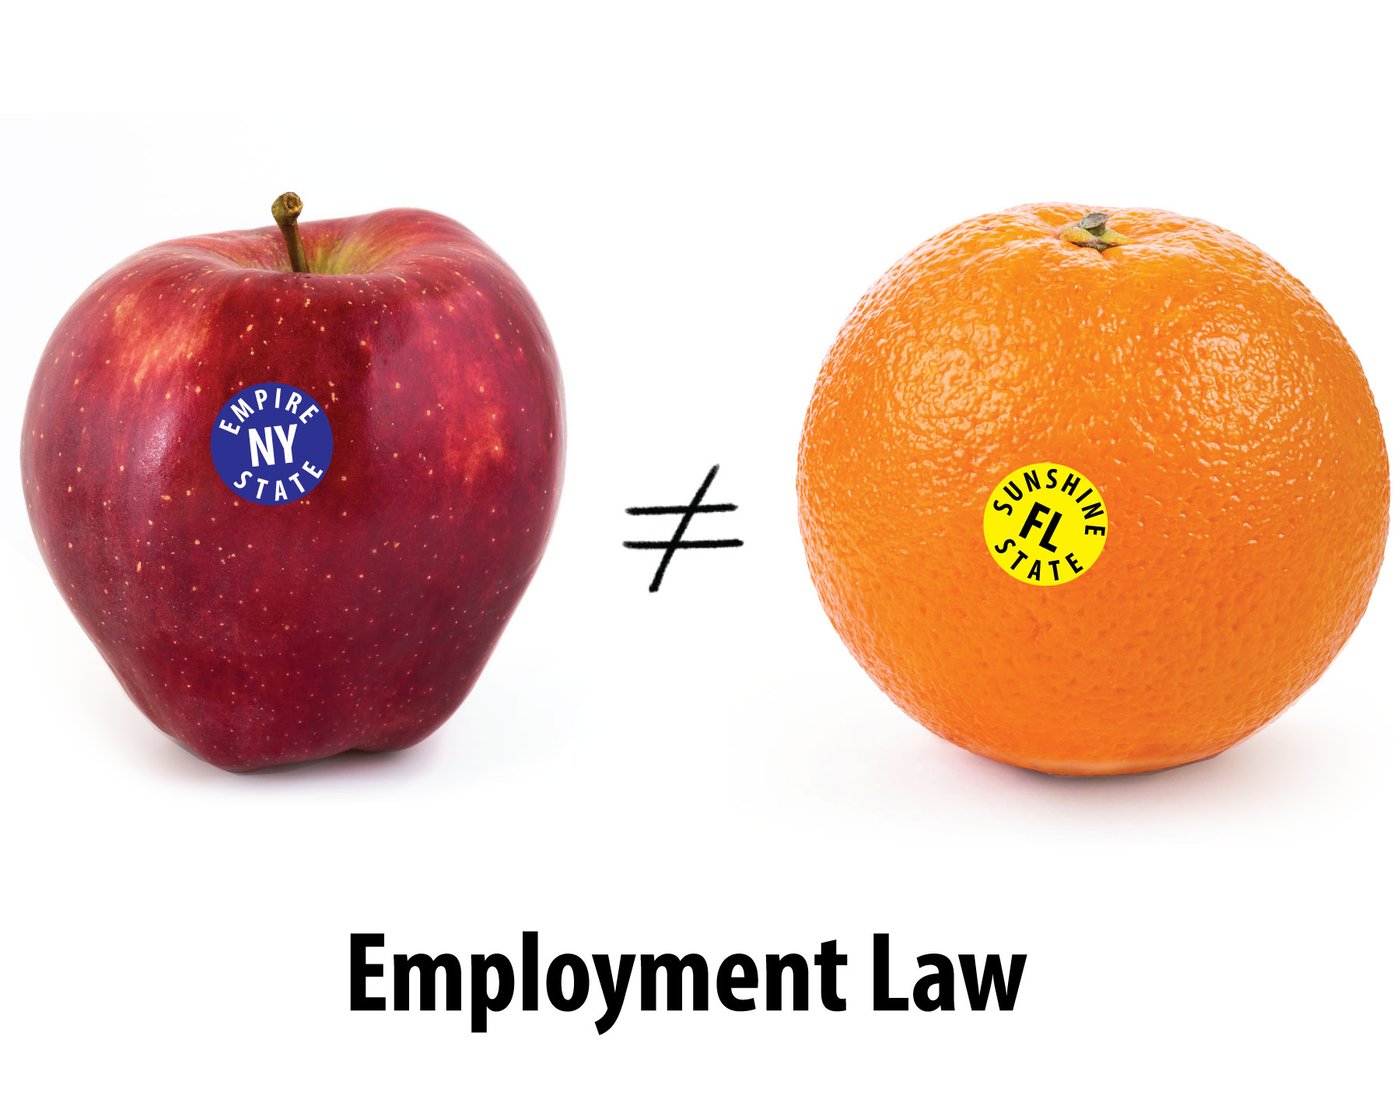 Apples-and-oranges-Employment-Laws-2022-no-shadow